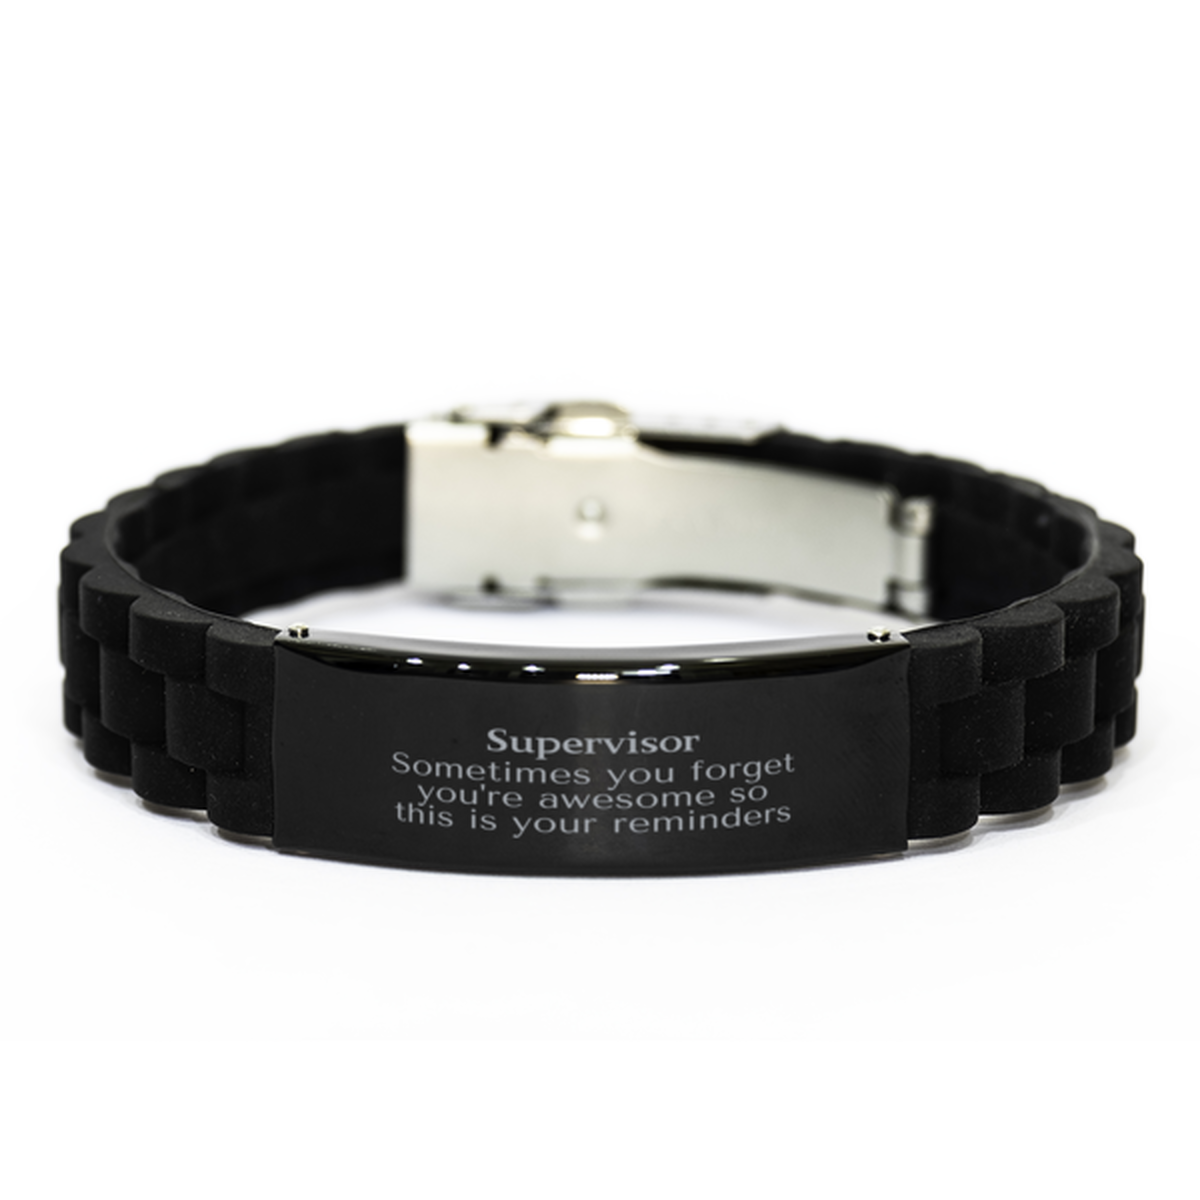 Sentimental Supervisor Black Glidelock Clasp Bracelet, Supervisor Sometimes you forget you're awesome so this is your reminders, Graduation Christmas Birthday Gifts for Supervisor, Men, Women, Coworkers